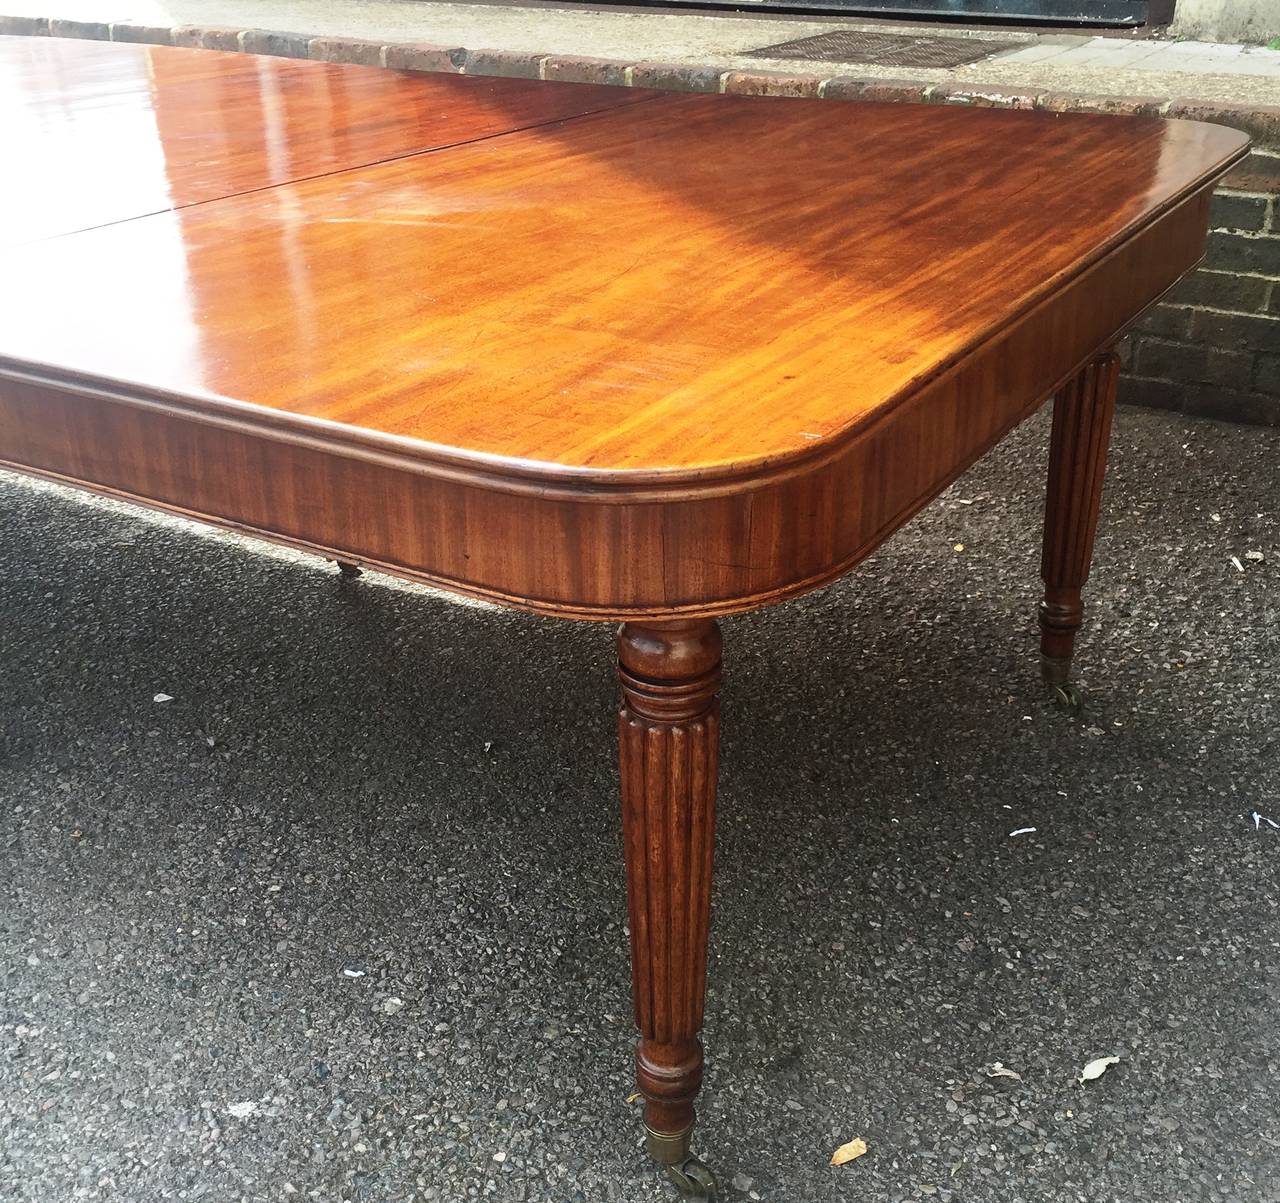 A very good quality late Regency period, Gillows influenced mahogany extending dining table, having three original leaves, a wonderful faded patina to all. Raised on turned reeded legs and terminating in the original brass bucket castors. Extends to